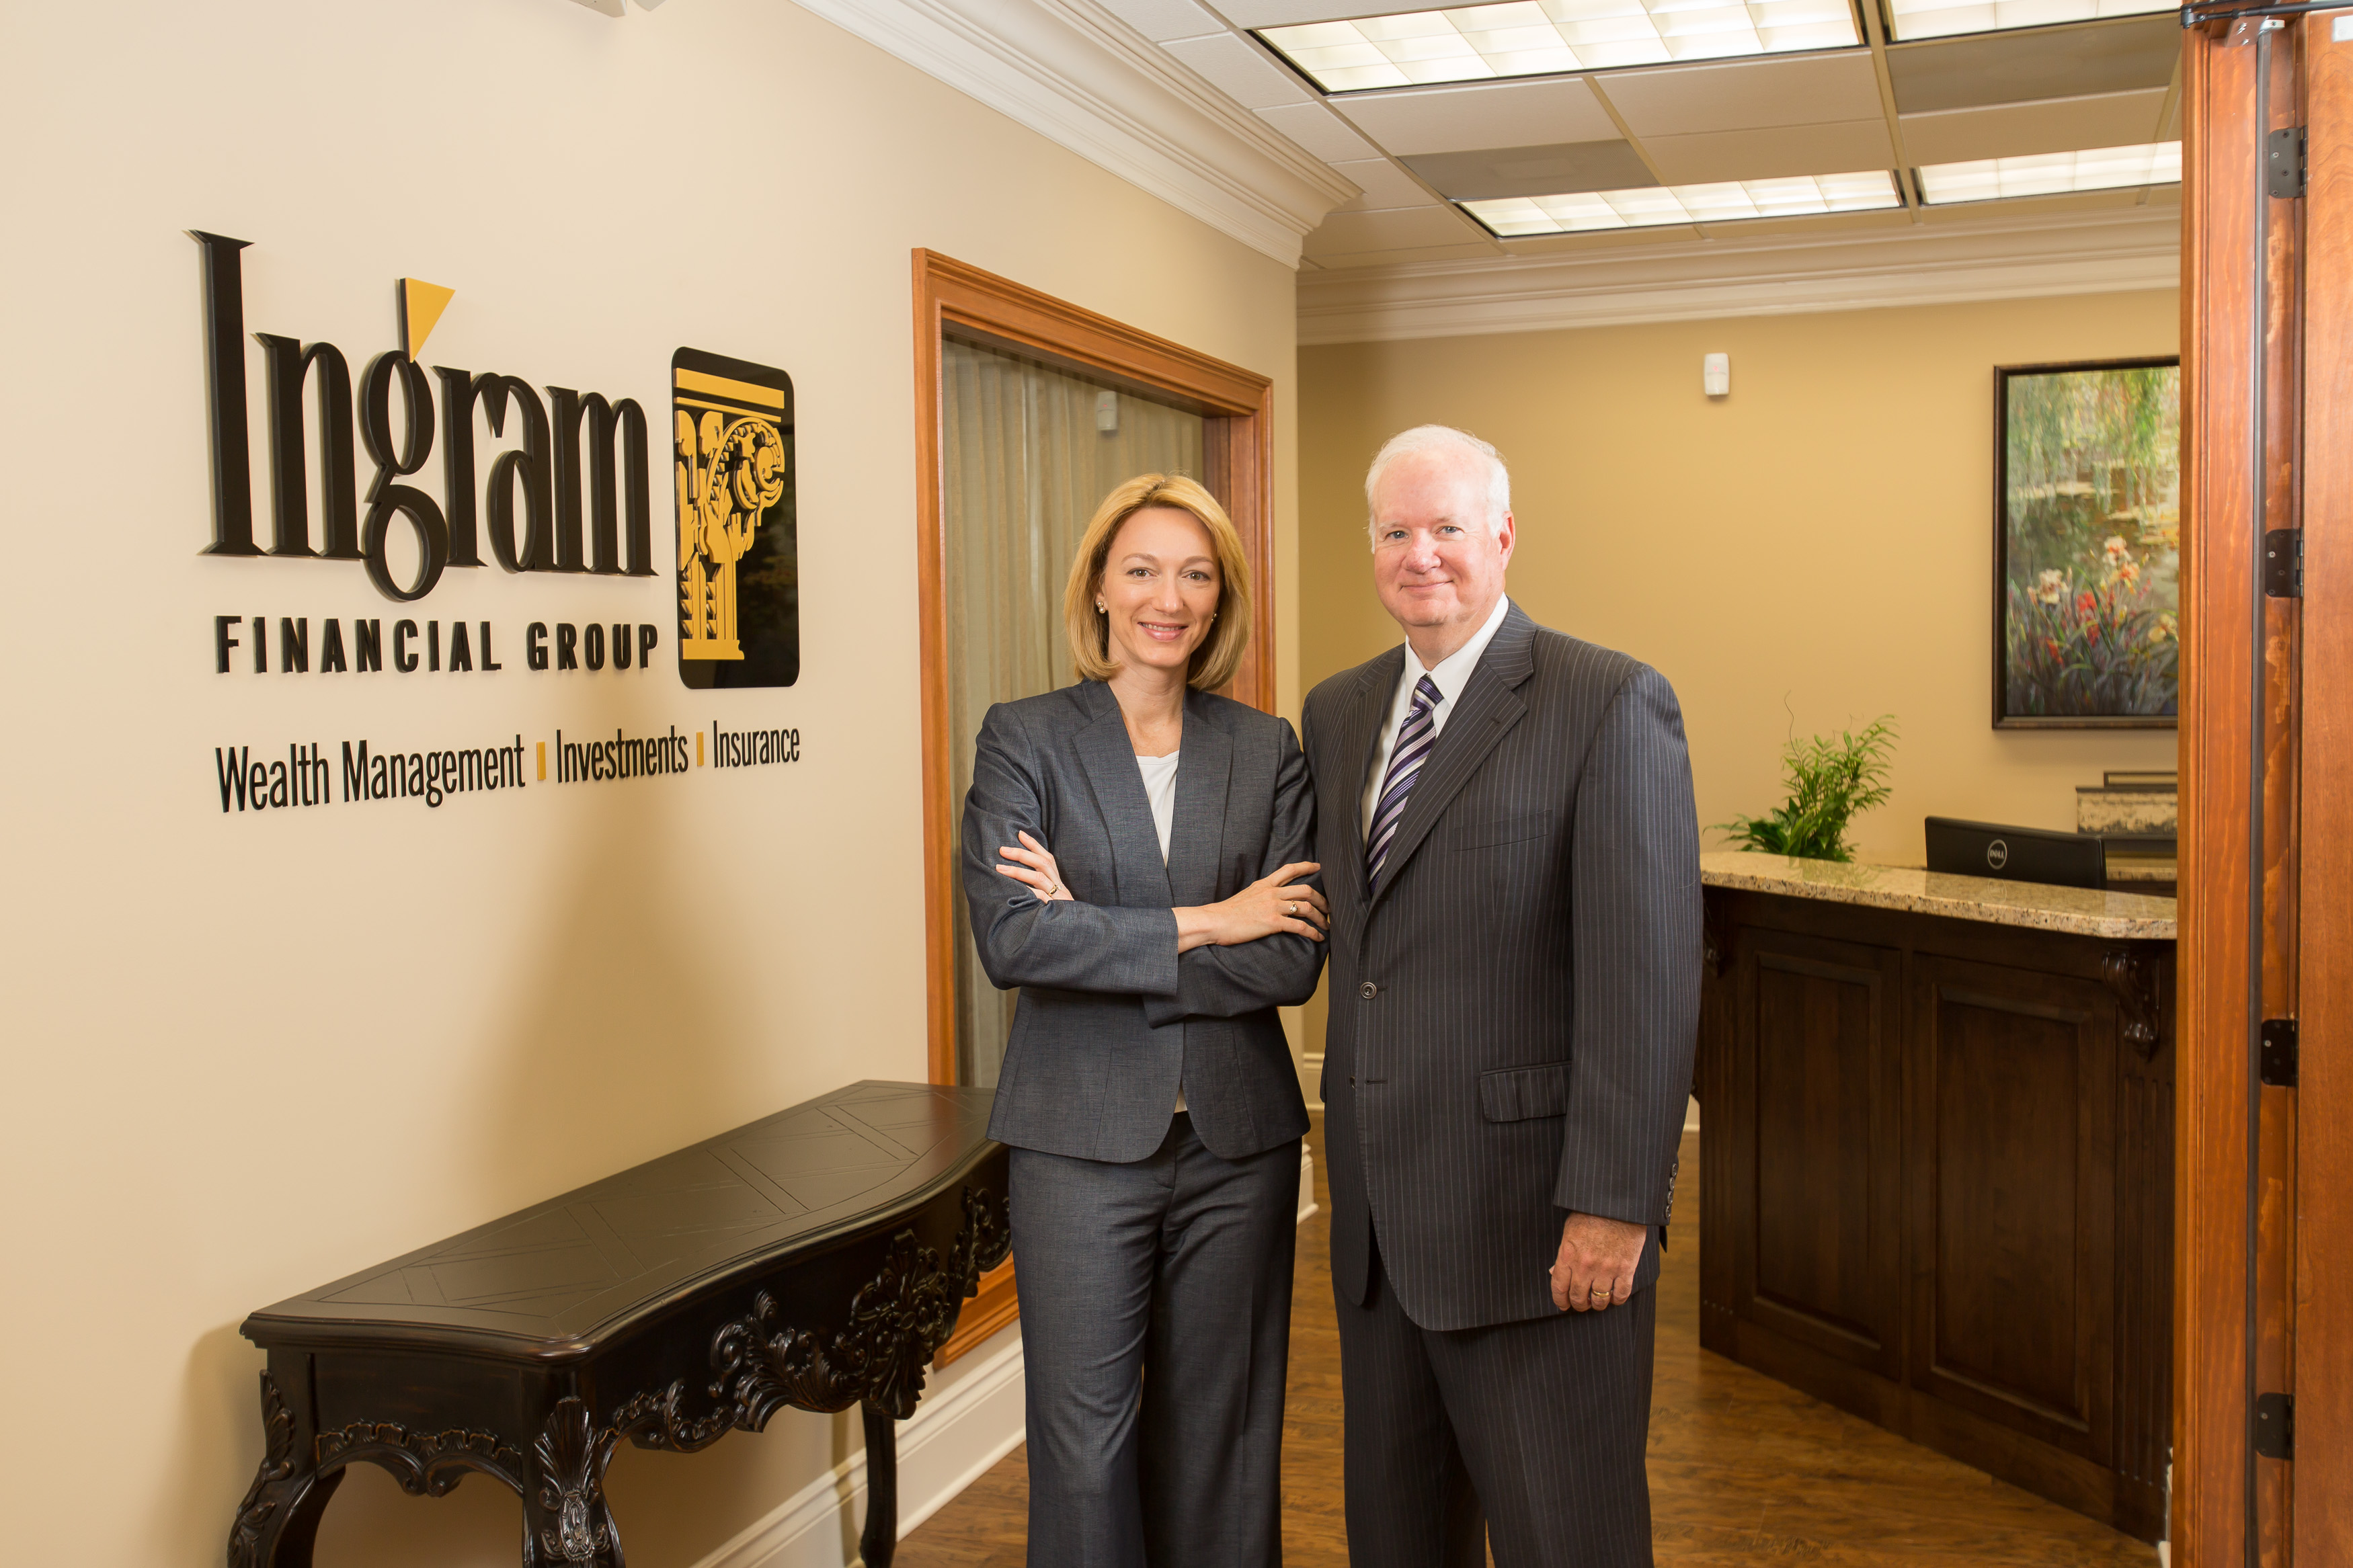 Our Wealth Management Philosophy | Ingram Financial Group